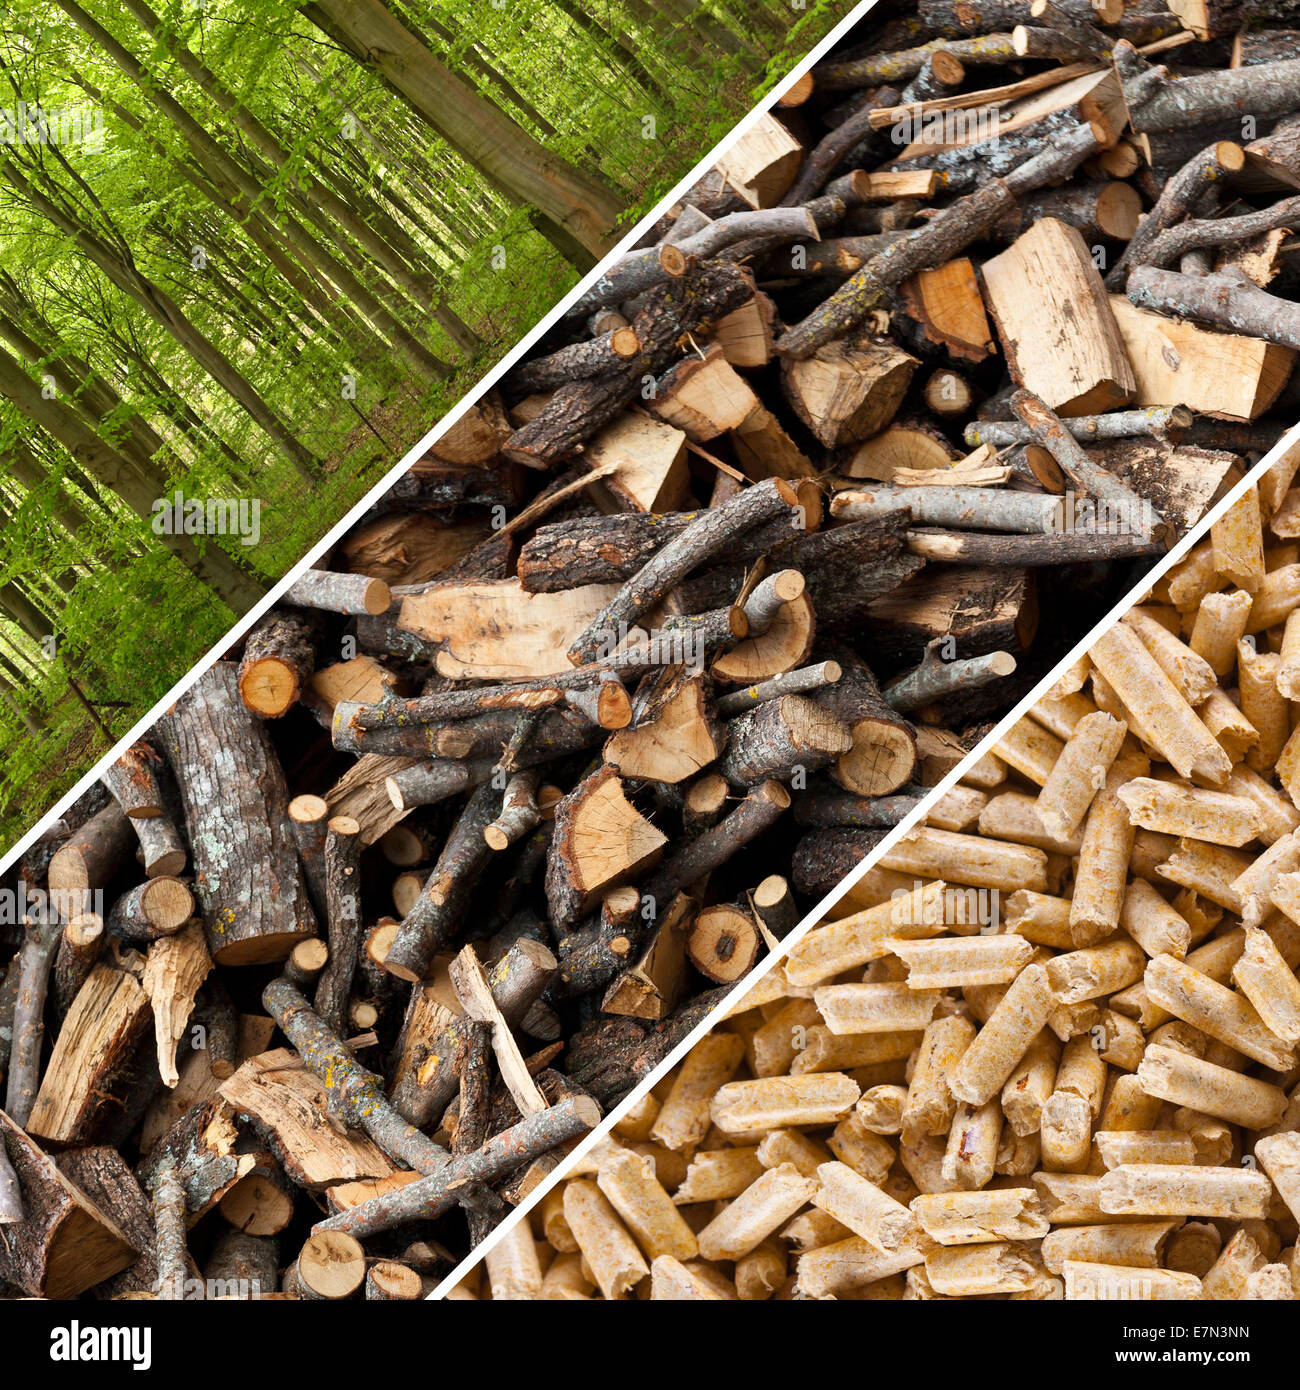 Steps of industrial production for wooden pellets. Stock Photo